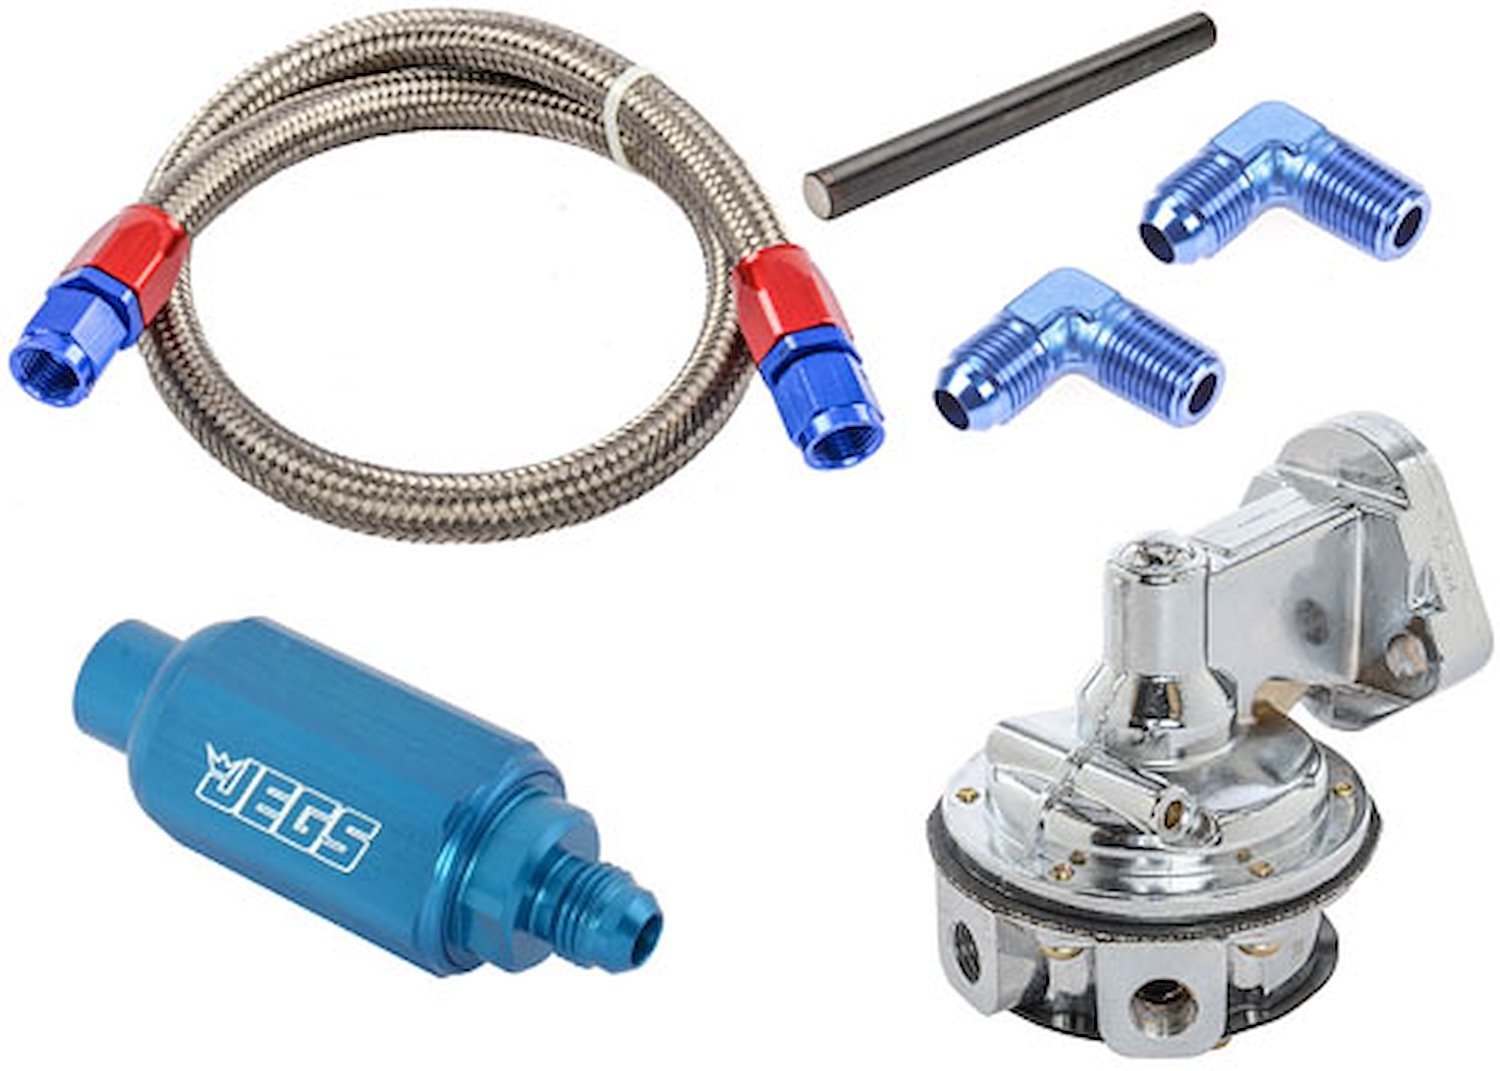 Mechanical Fuel Pump & Installation Kit for Big Block Chevy 396-427-454 [80 gph, Blue Fittings]